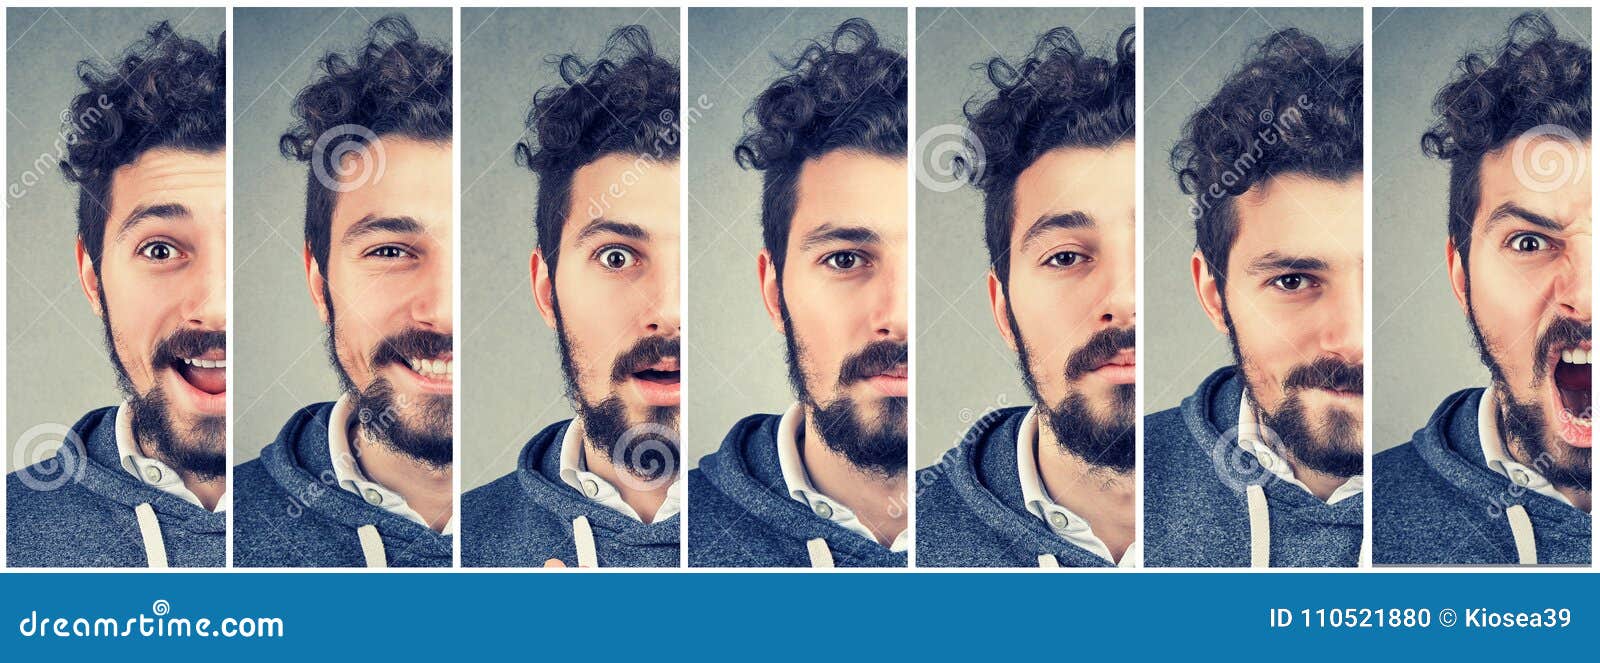 man changing mood expressing different emotions